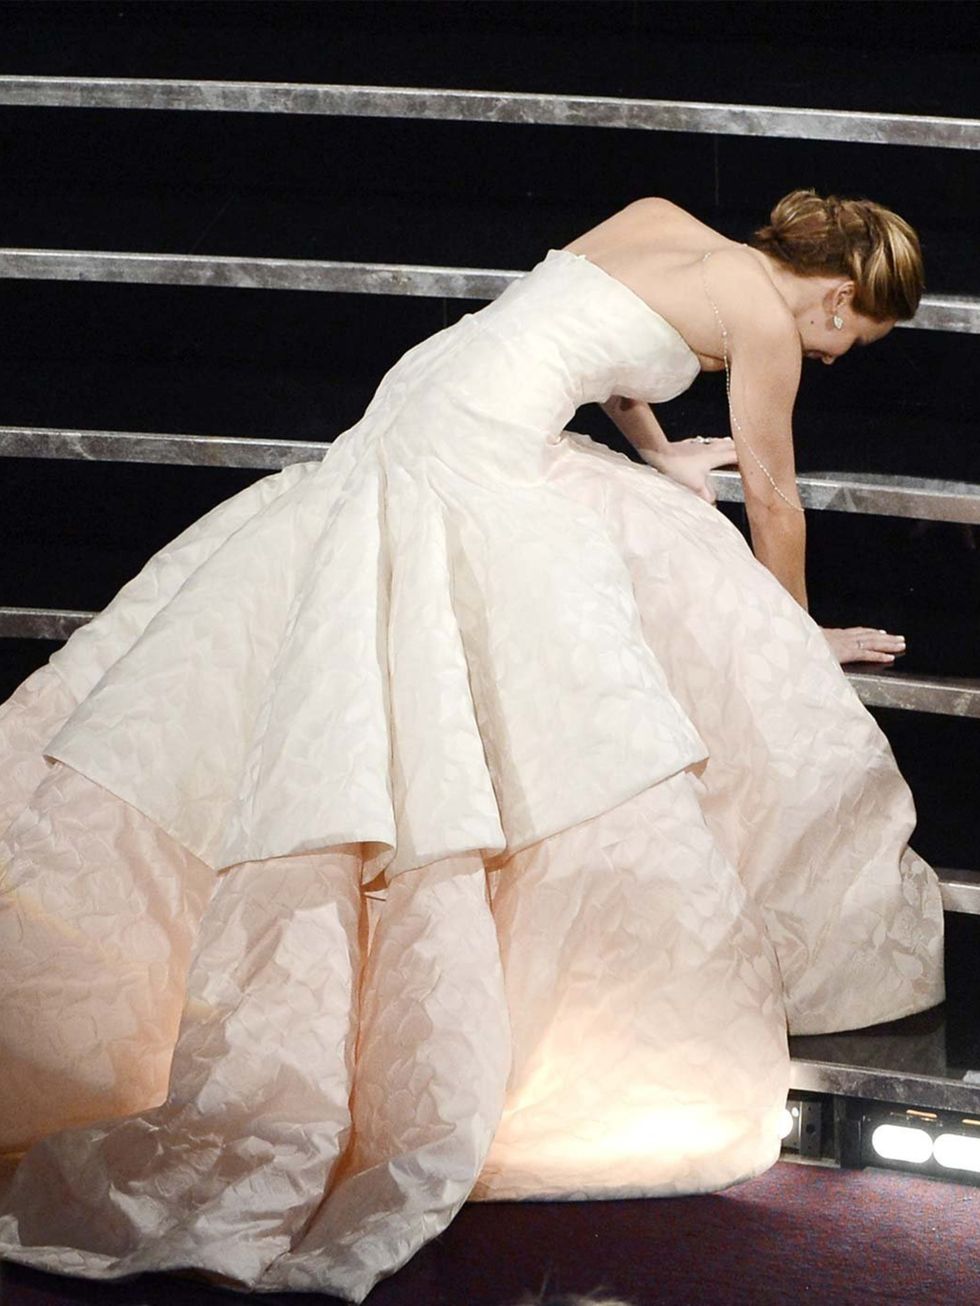 <p><strong>Jennifer Lawrence</strong><strong></strong><strong>s fall at the 2013 Oscars</strong> </p><p>When <a href="http://www.elleuk.com/star-style/celebrity-style-files/jennifer-lawrence">Jennifer Lawrence</a> took a tumble in her Dior Couture gown a